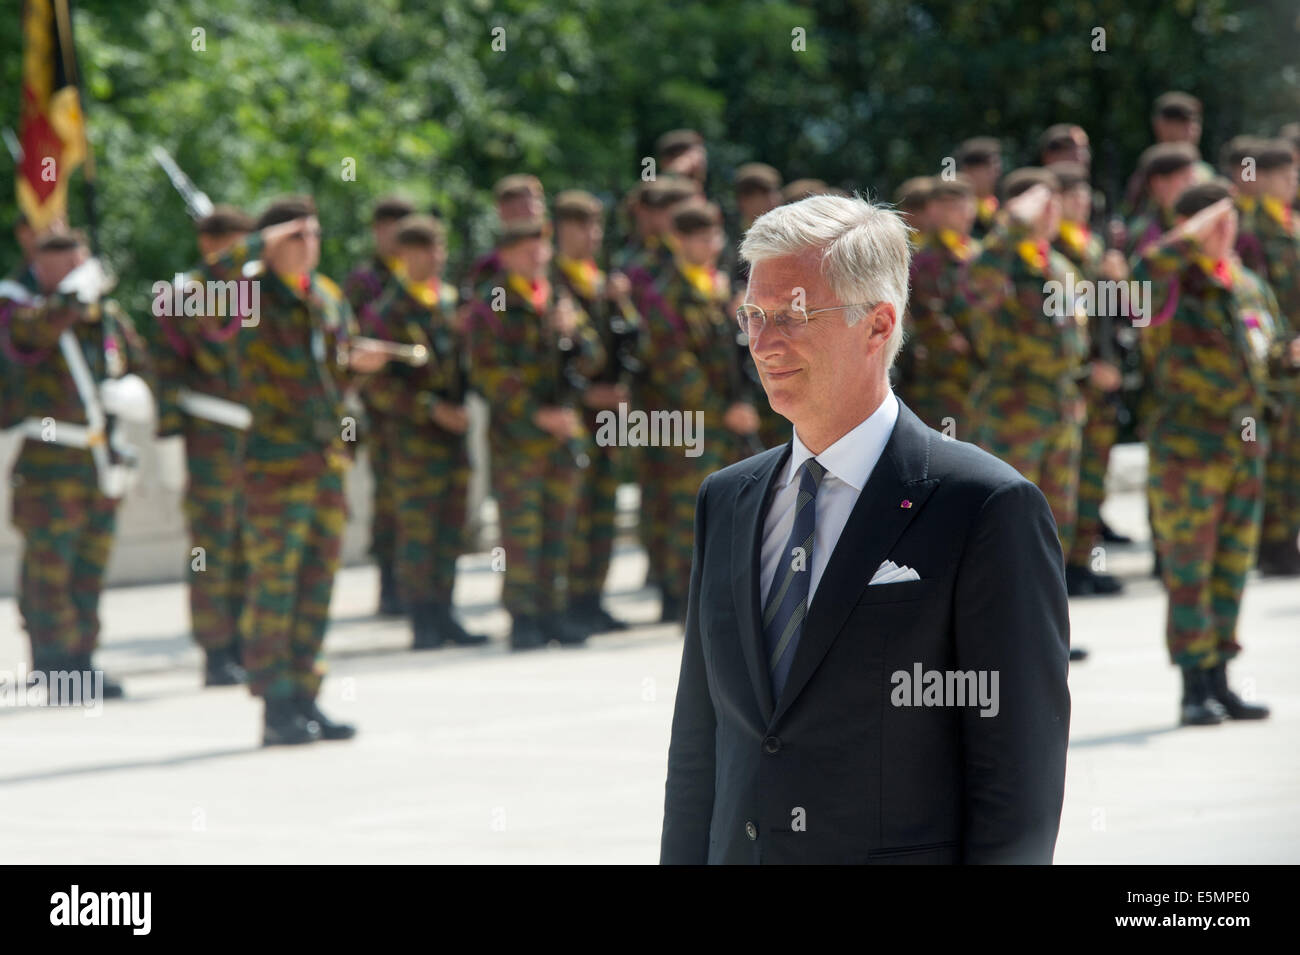 Liege, Belgium. 04th Aug, 2014. Belgian King Philippe takes part in the international memorial ceremony for the 100th anniversary of the beginning of the First World War in Liege, Belgium, 04 August 2014. The year 2014 sees the 100th anniversary of the beginning of WWI, or the Great War, which according to official statistics cost more than 37 million military and civilian casualties between 1914 and 1918. Photo: Maurizio Gambarini/dpa/Alamy Live News Stock Photo